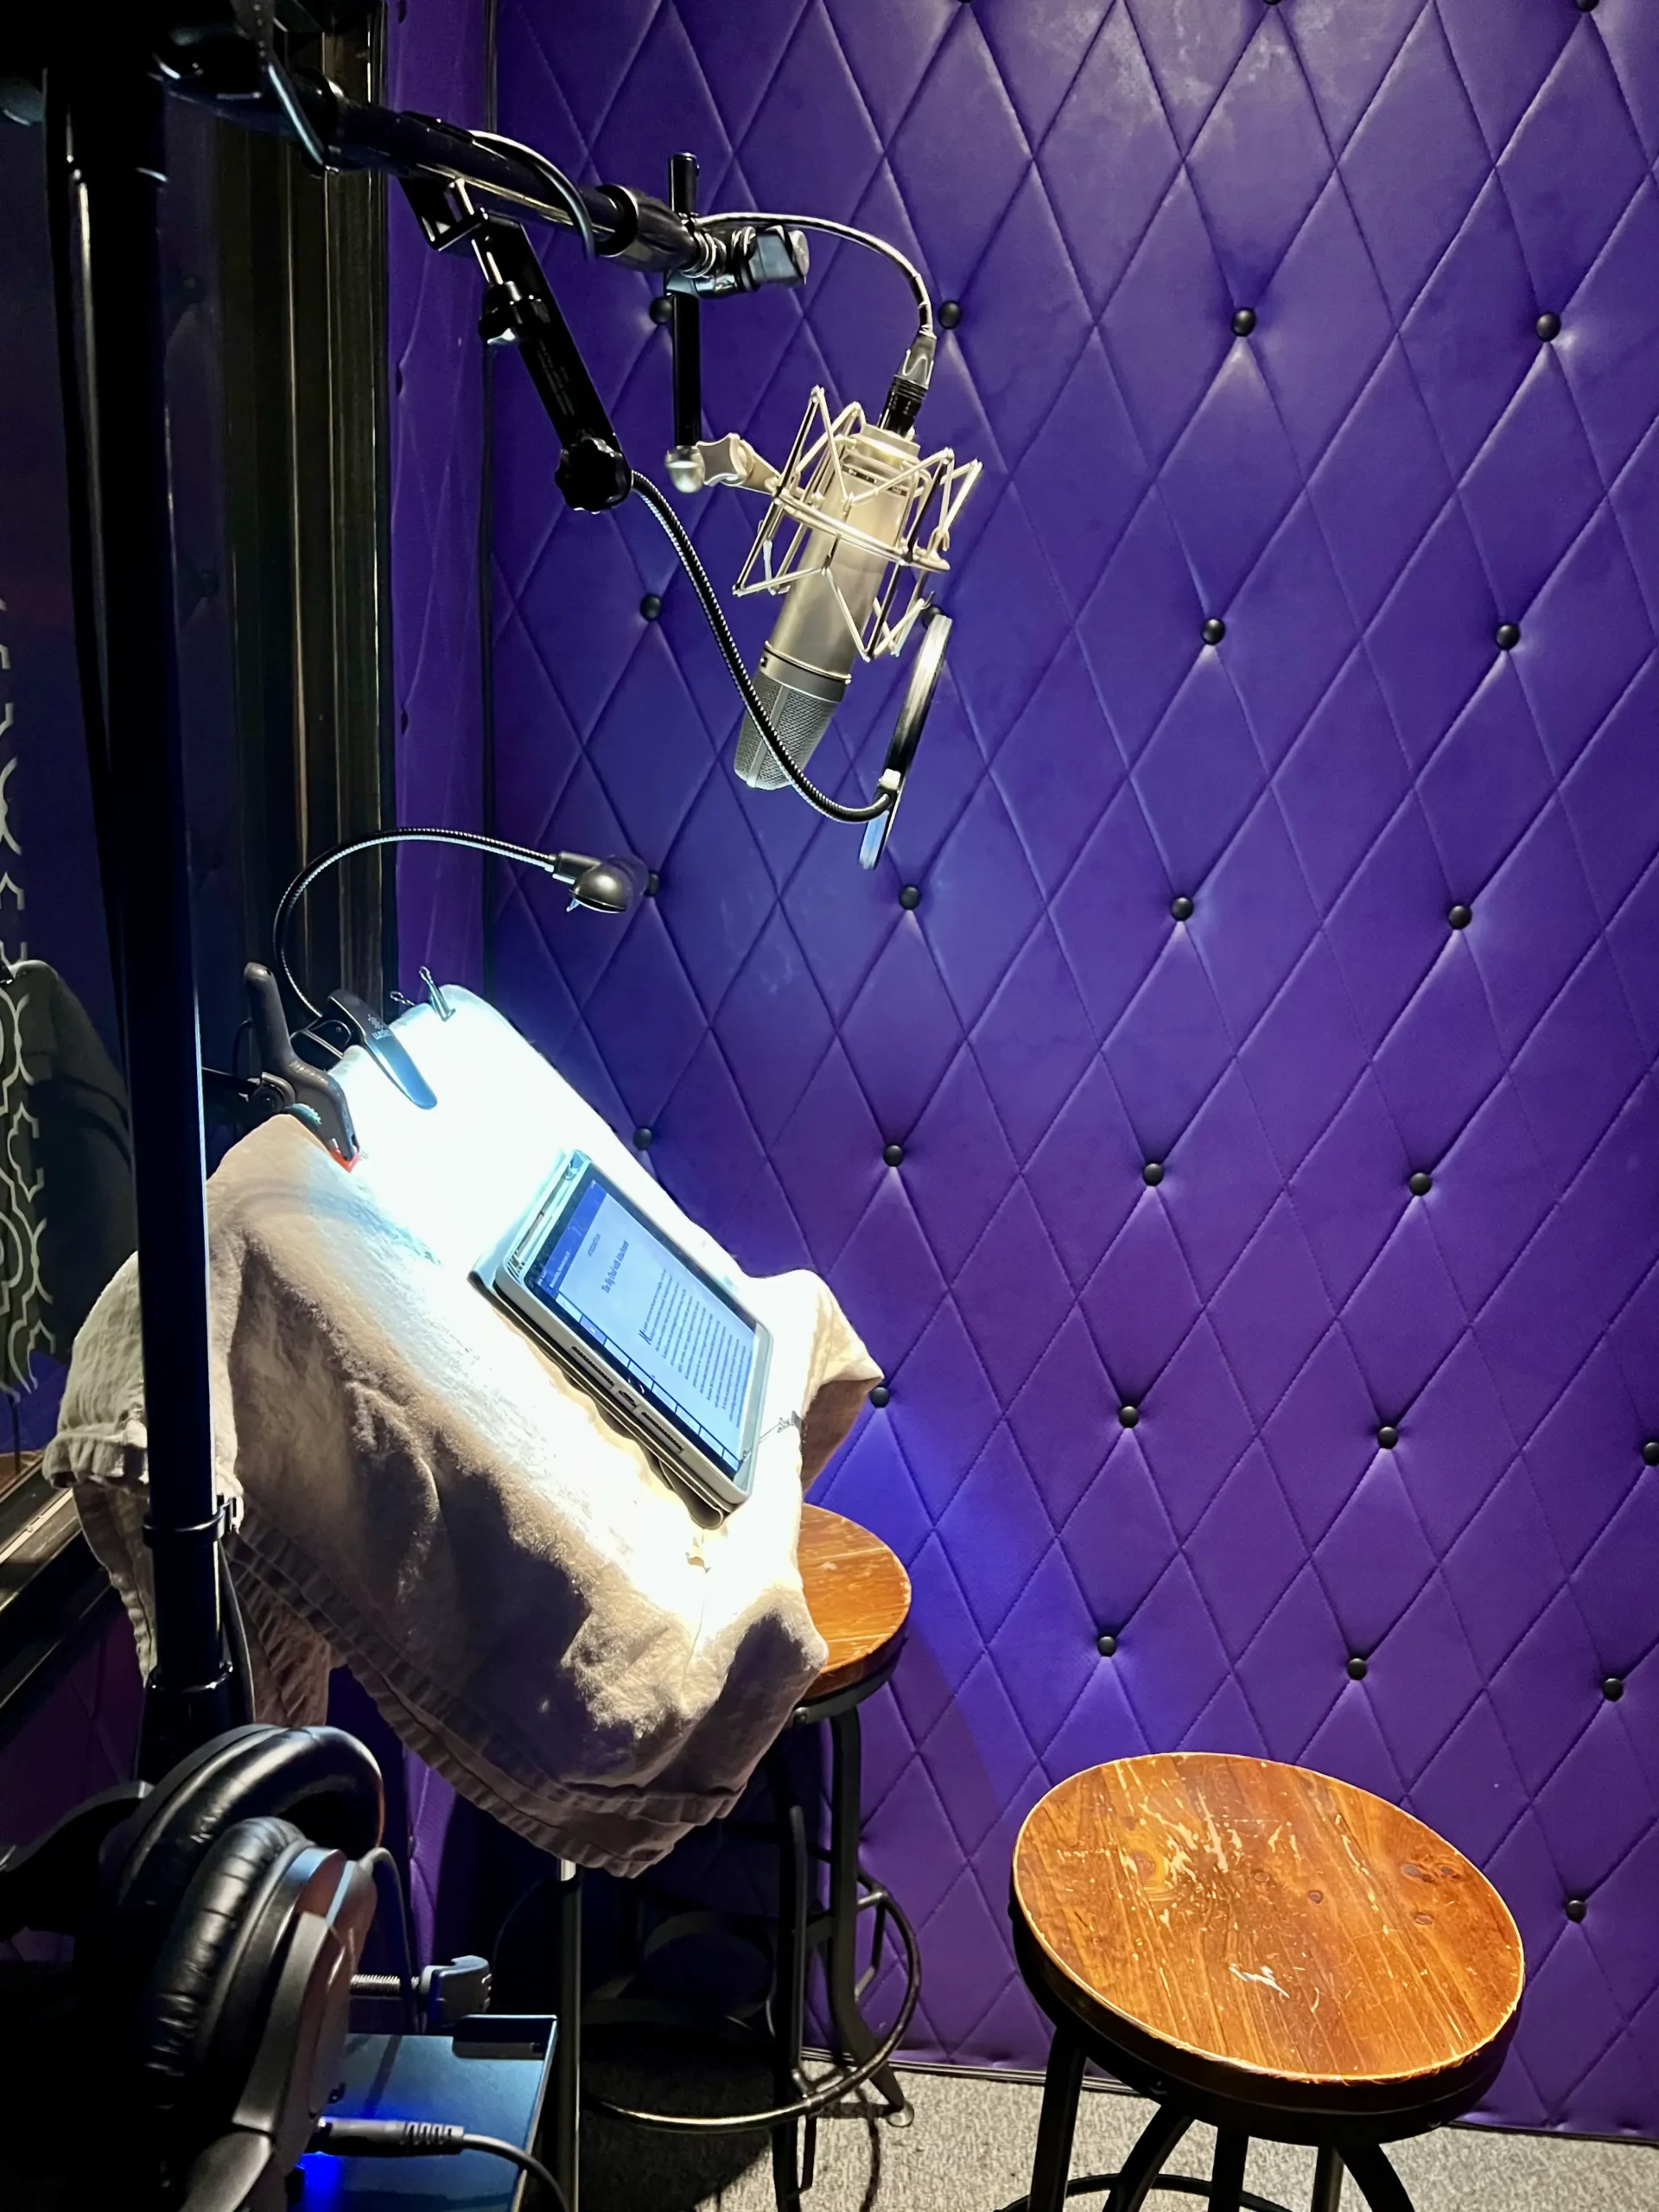 Recording studio setup with a microphone, pop filter, headphones, and a digital tablet on a music stand, against a purple padded wall.